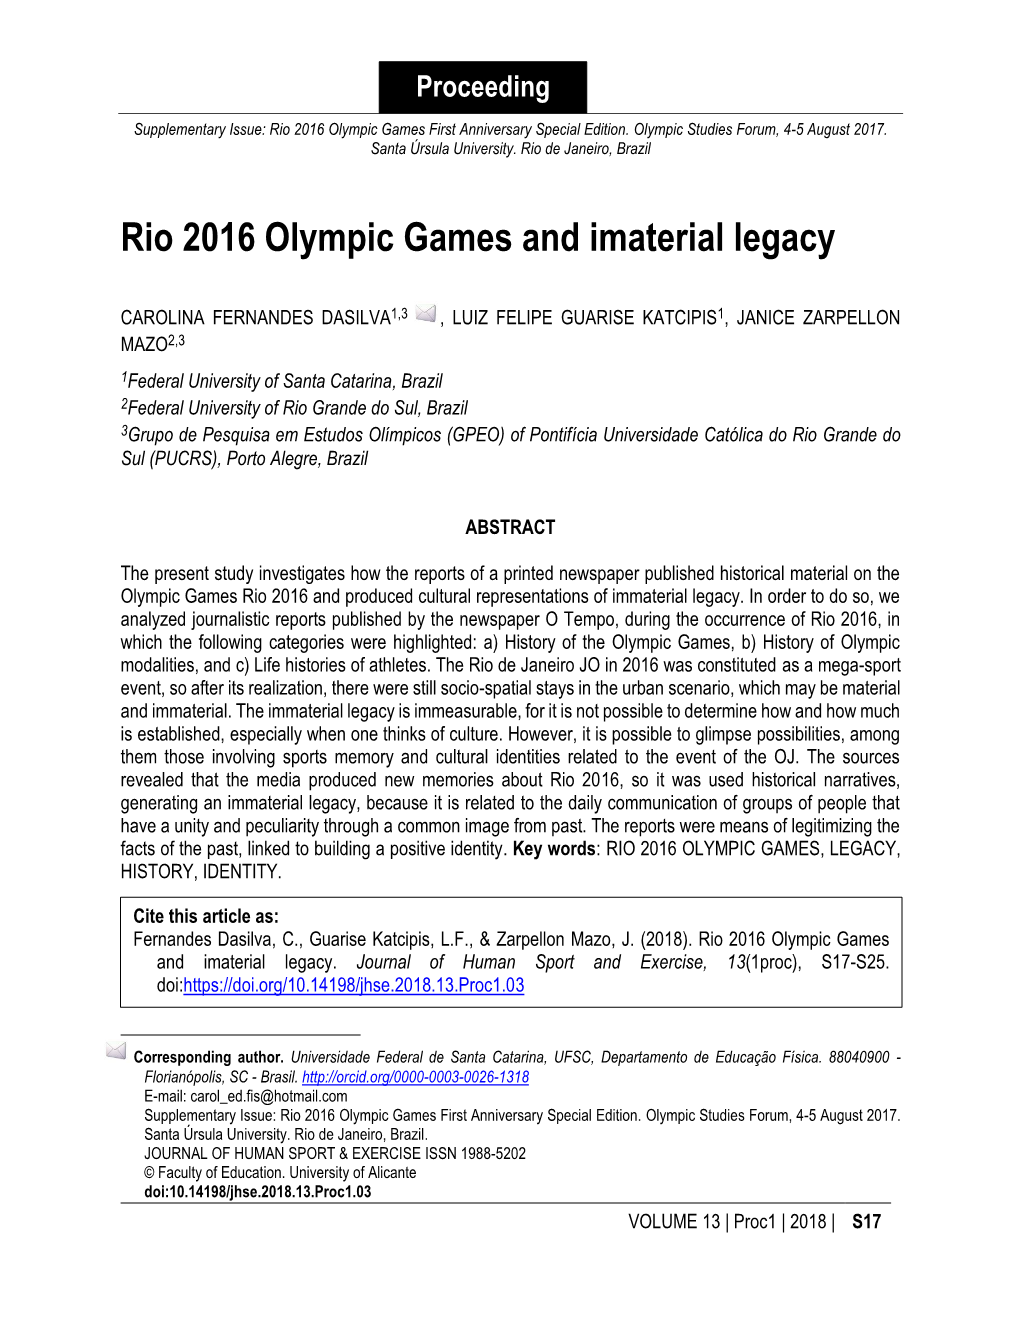 Rio 2016 Olympic Games and Imaterial Legacy